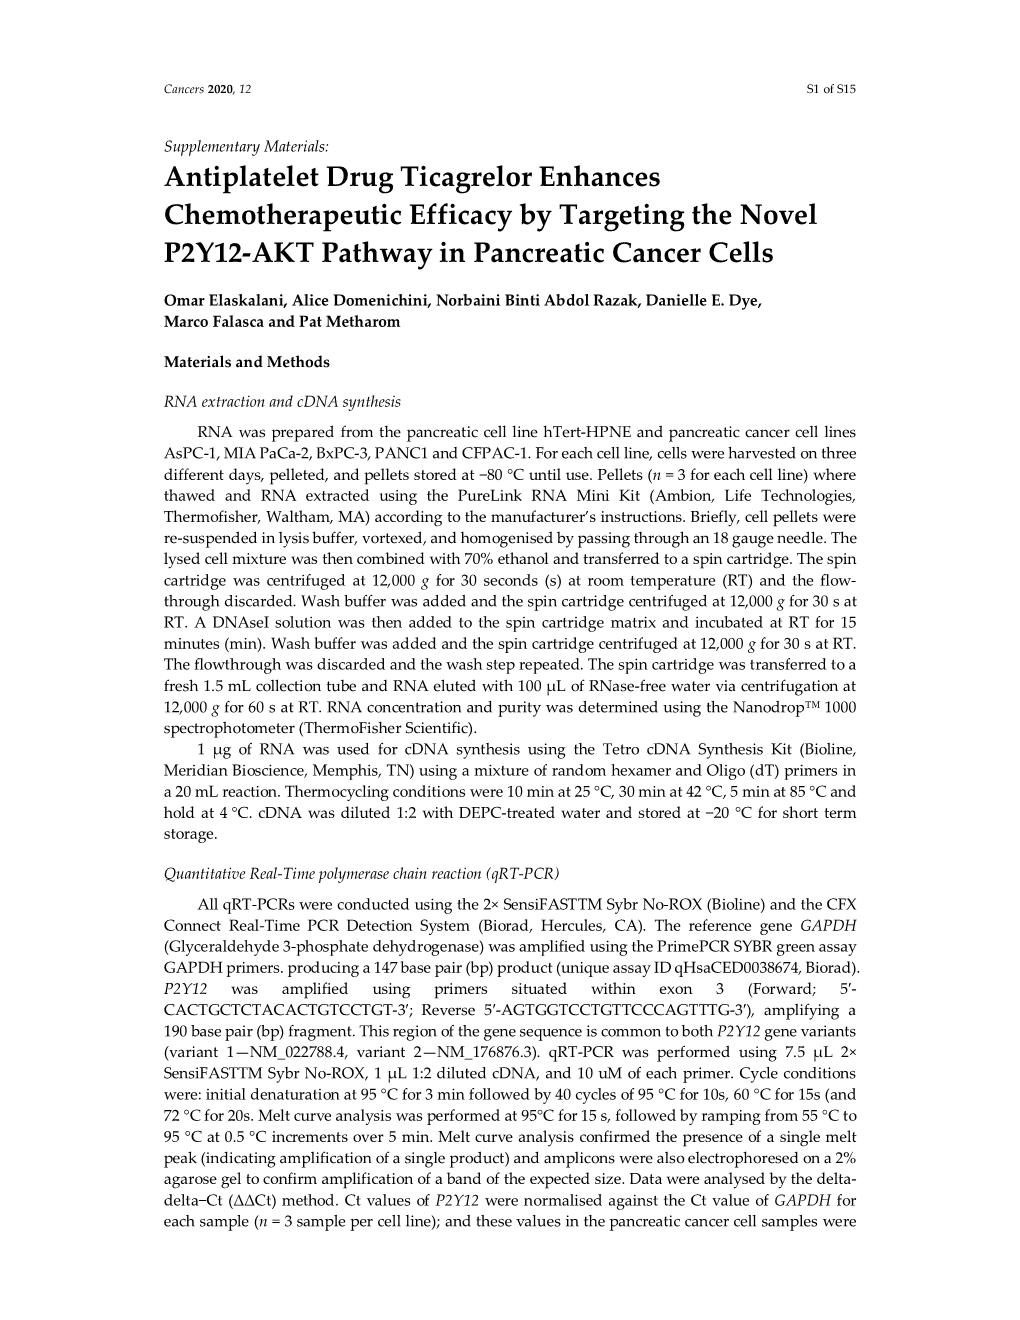 Antiplatelet Drug Ticagrelor Enhances Chemotherapeutic Efficacy by Targeting the Novel P2Y12-AKT Pathway in Pancreatic Cancer Cells